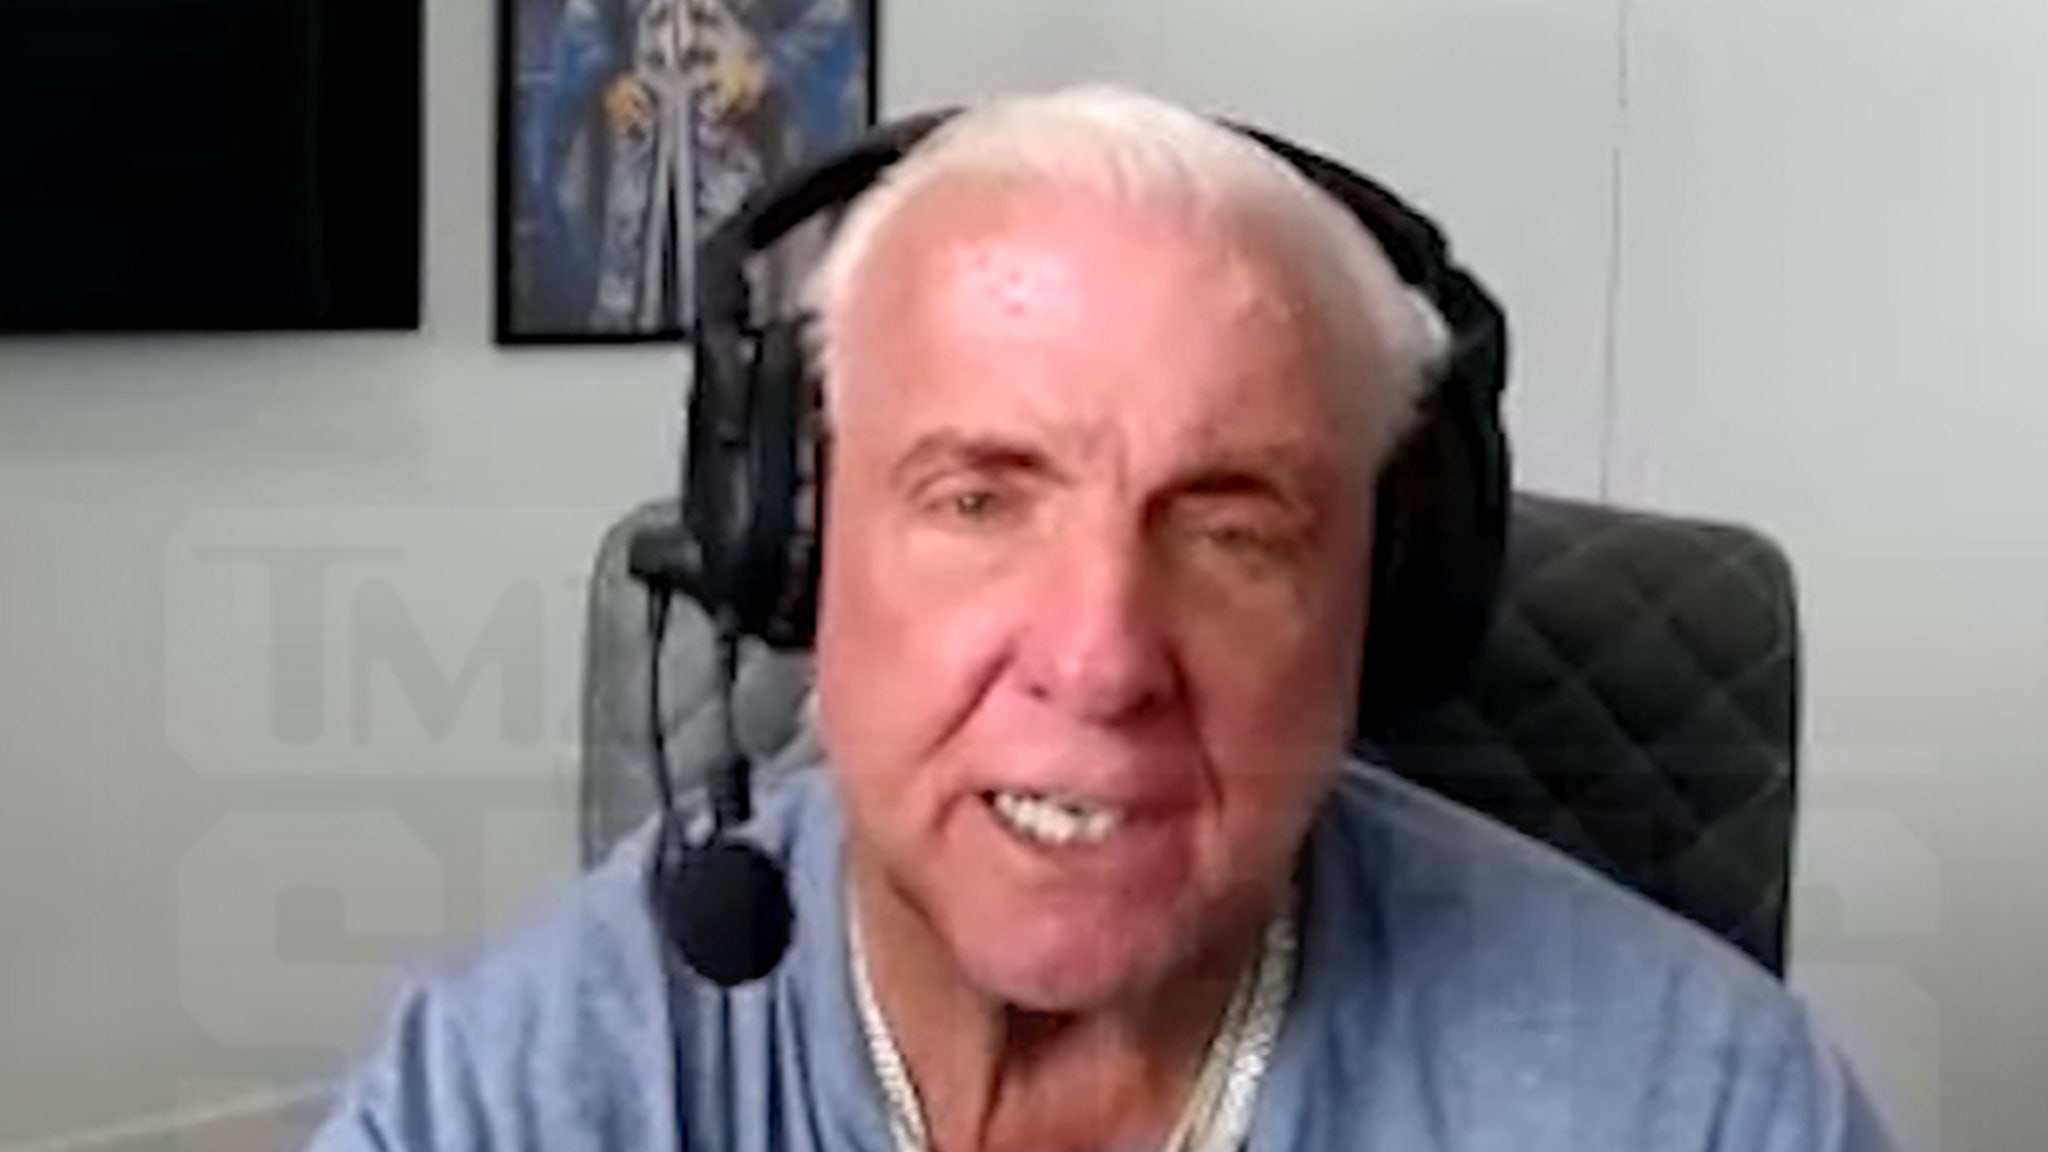 Ric Flair on Vince McMahon's WWE Retirement, "I Hate It"